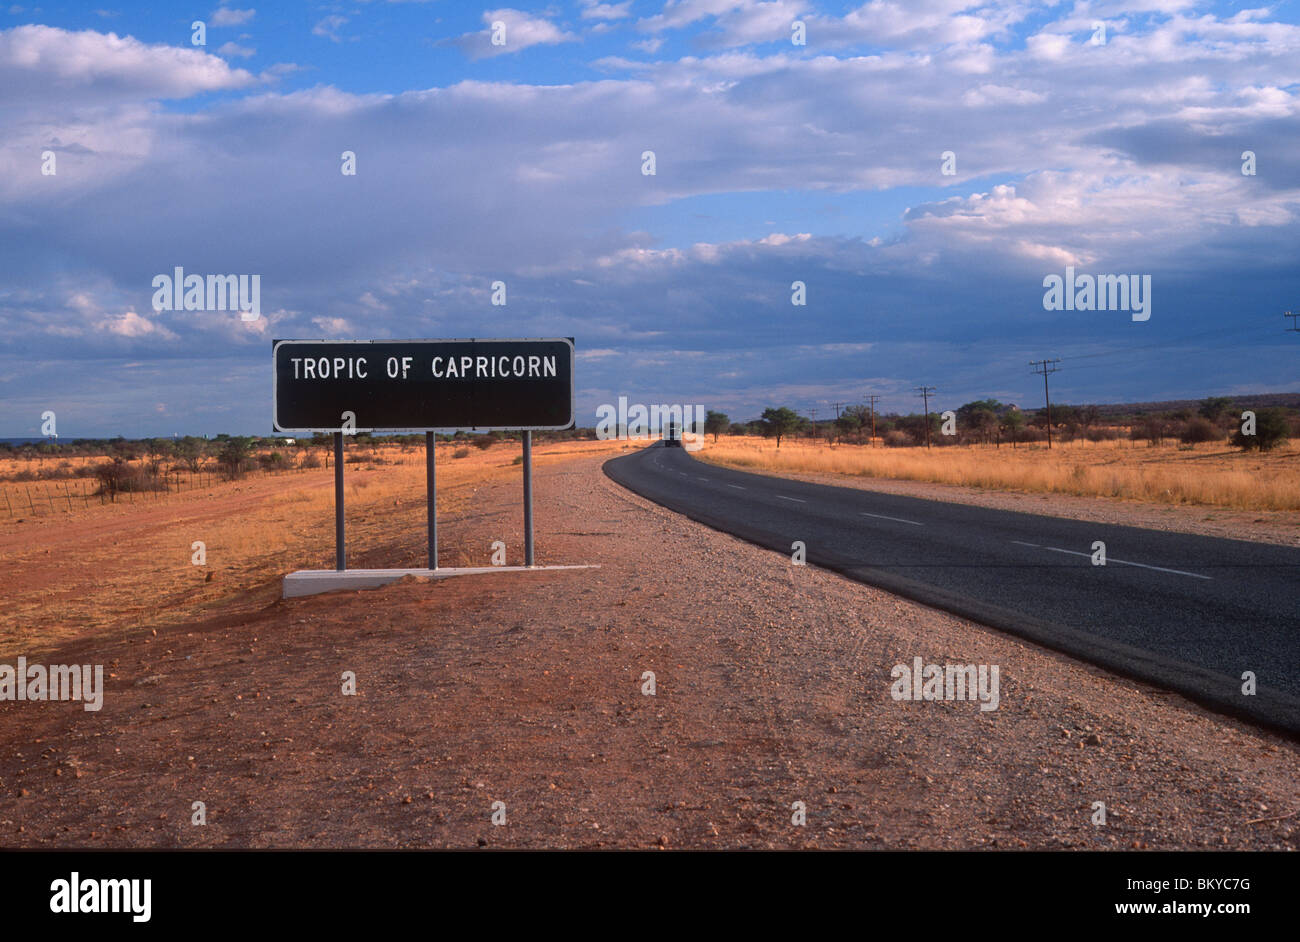 Sign marking the Tropic of Capricorn, Namibia Stock Photo